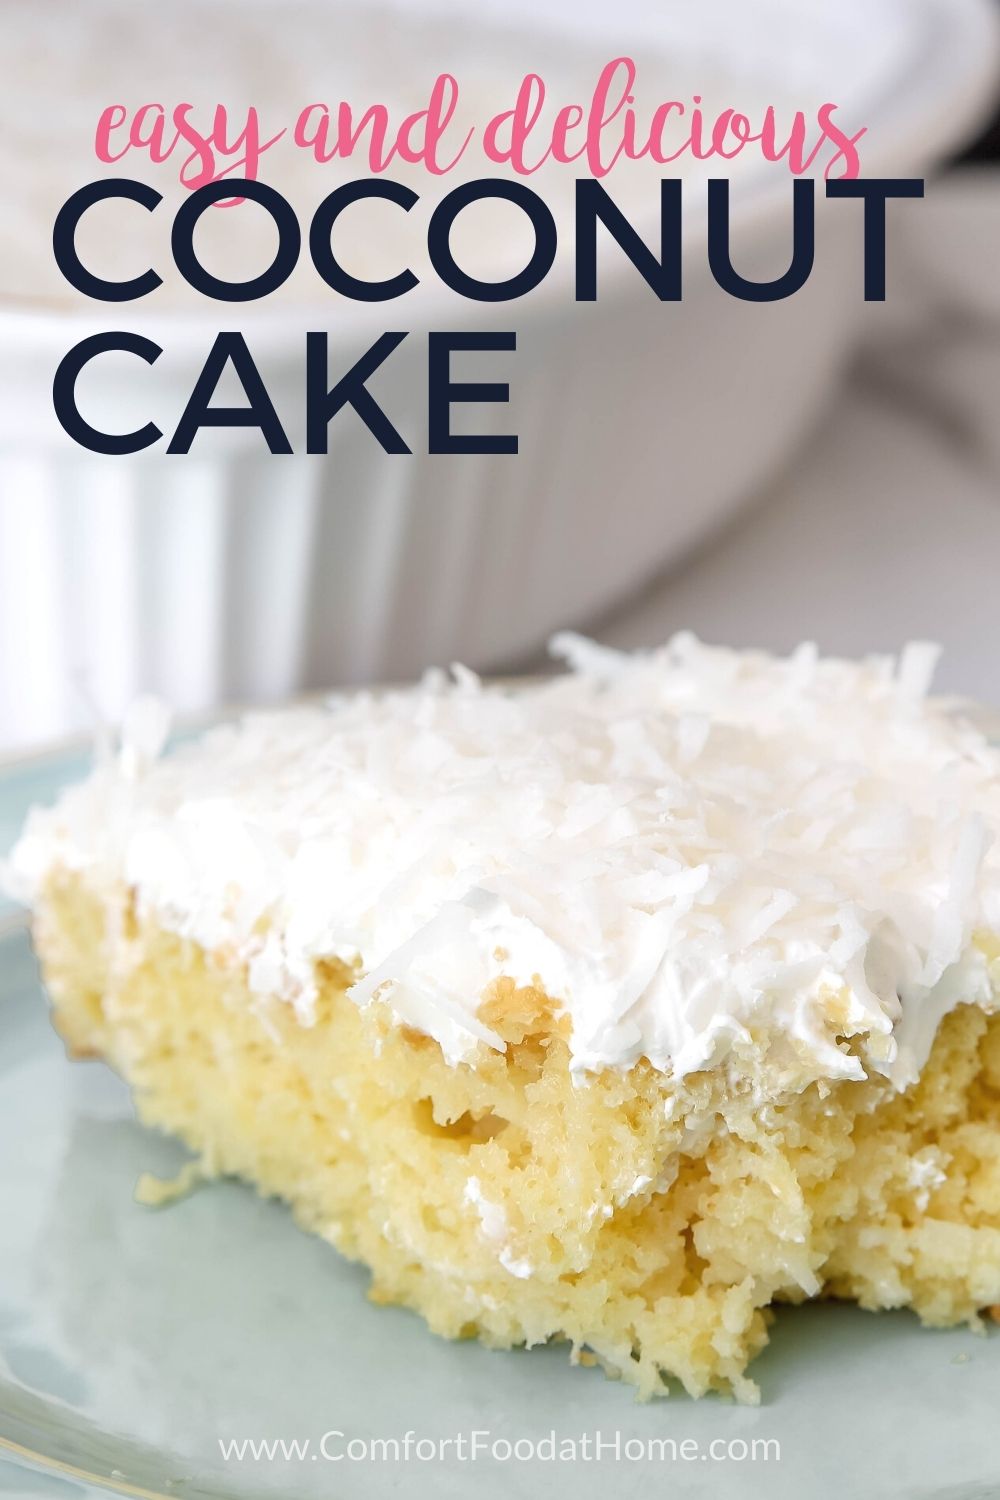 Easy Coconut Cake Recipe - Comfort Food at Home